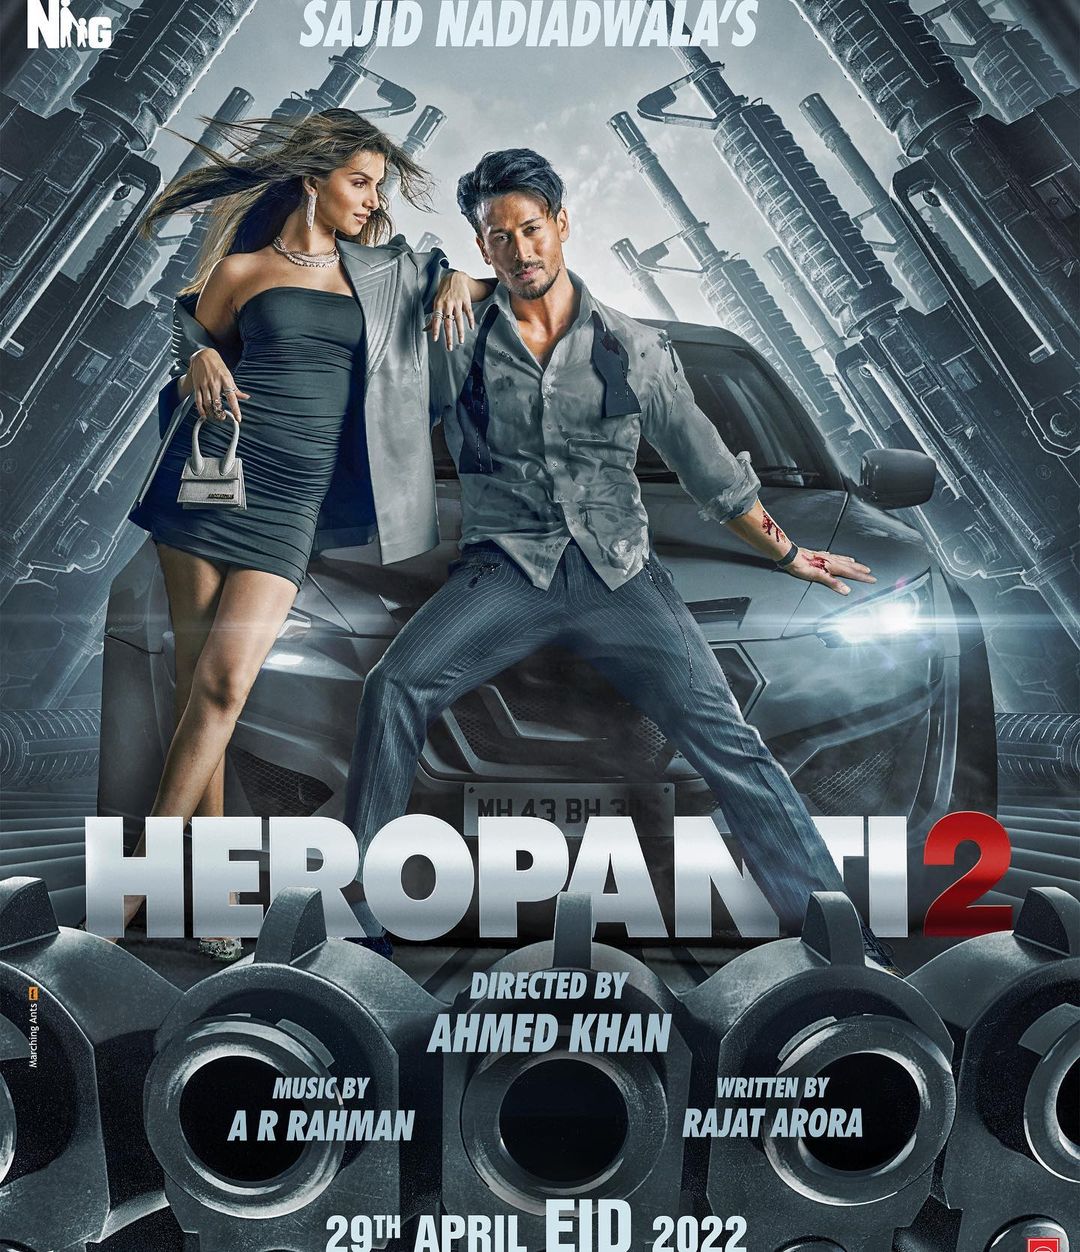 Tiger Shroff Unveils New Poster Of Heropanti 2 And The Film Is Confirmed To Clash With Ajay Devgn's Runway 34